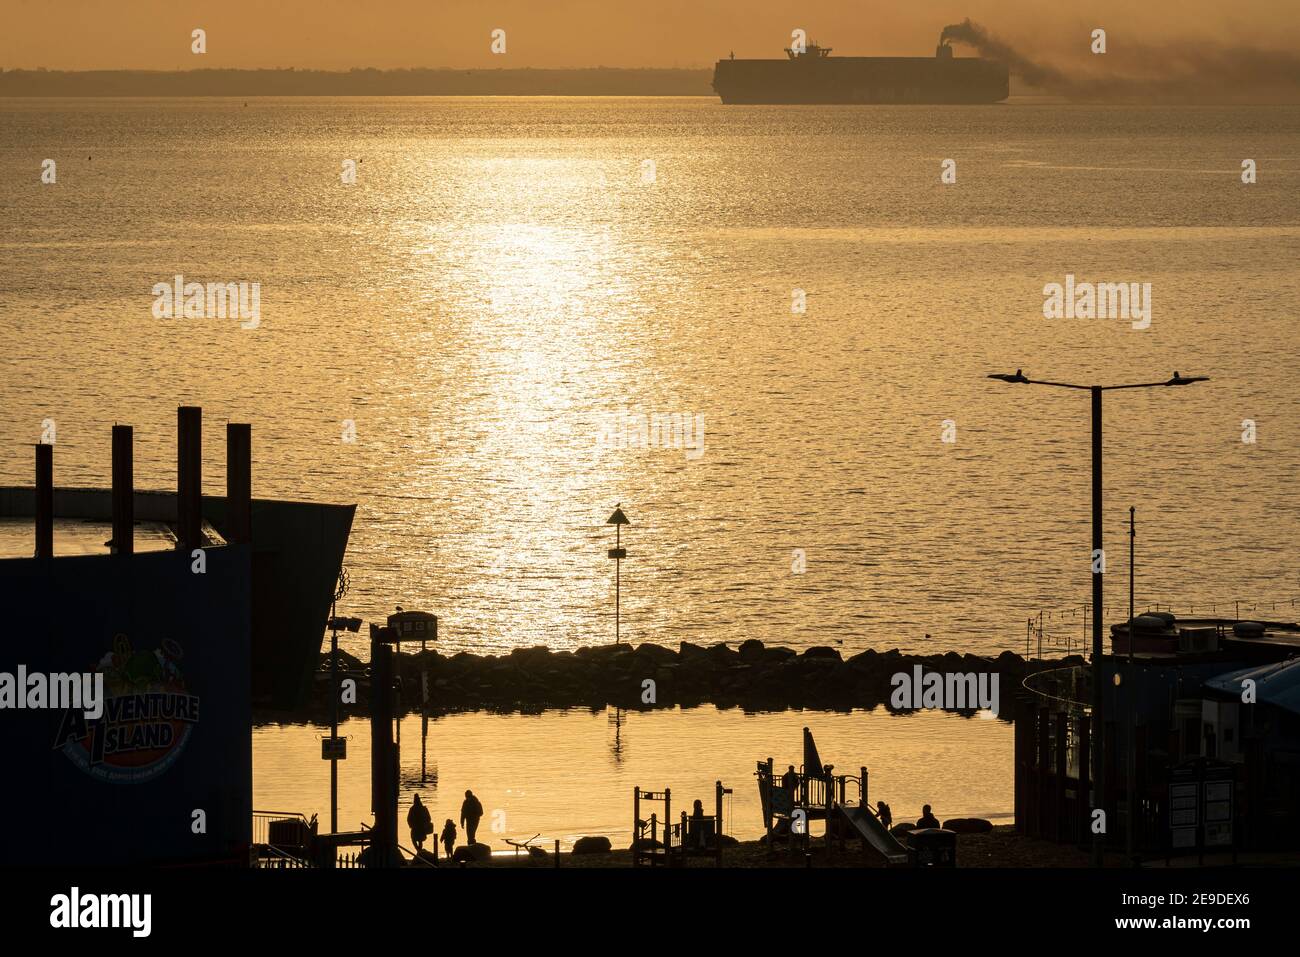 HMM Le Havre container ship on the Thames Estuary late afternoon off Southend on Sea, Essex, UK, belching exhaust. Children playing near lagoon. Dusk Stock Photo